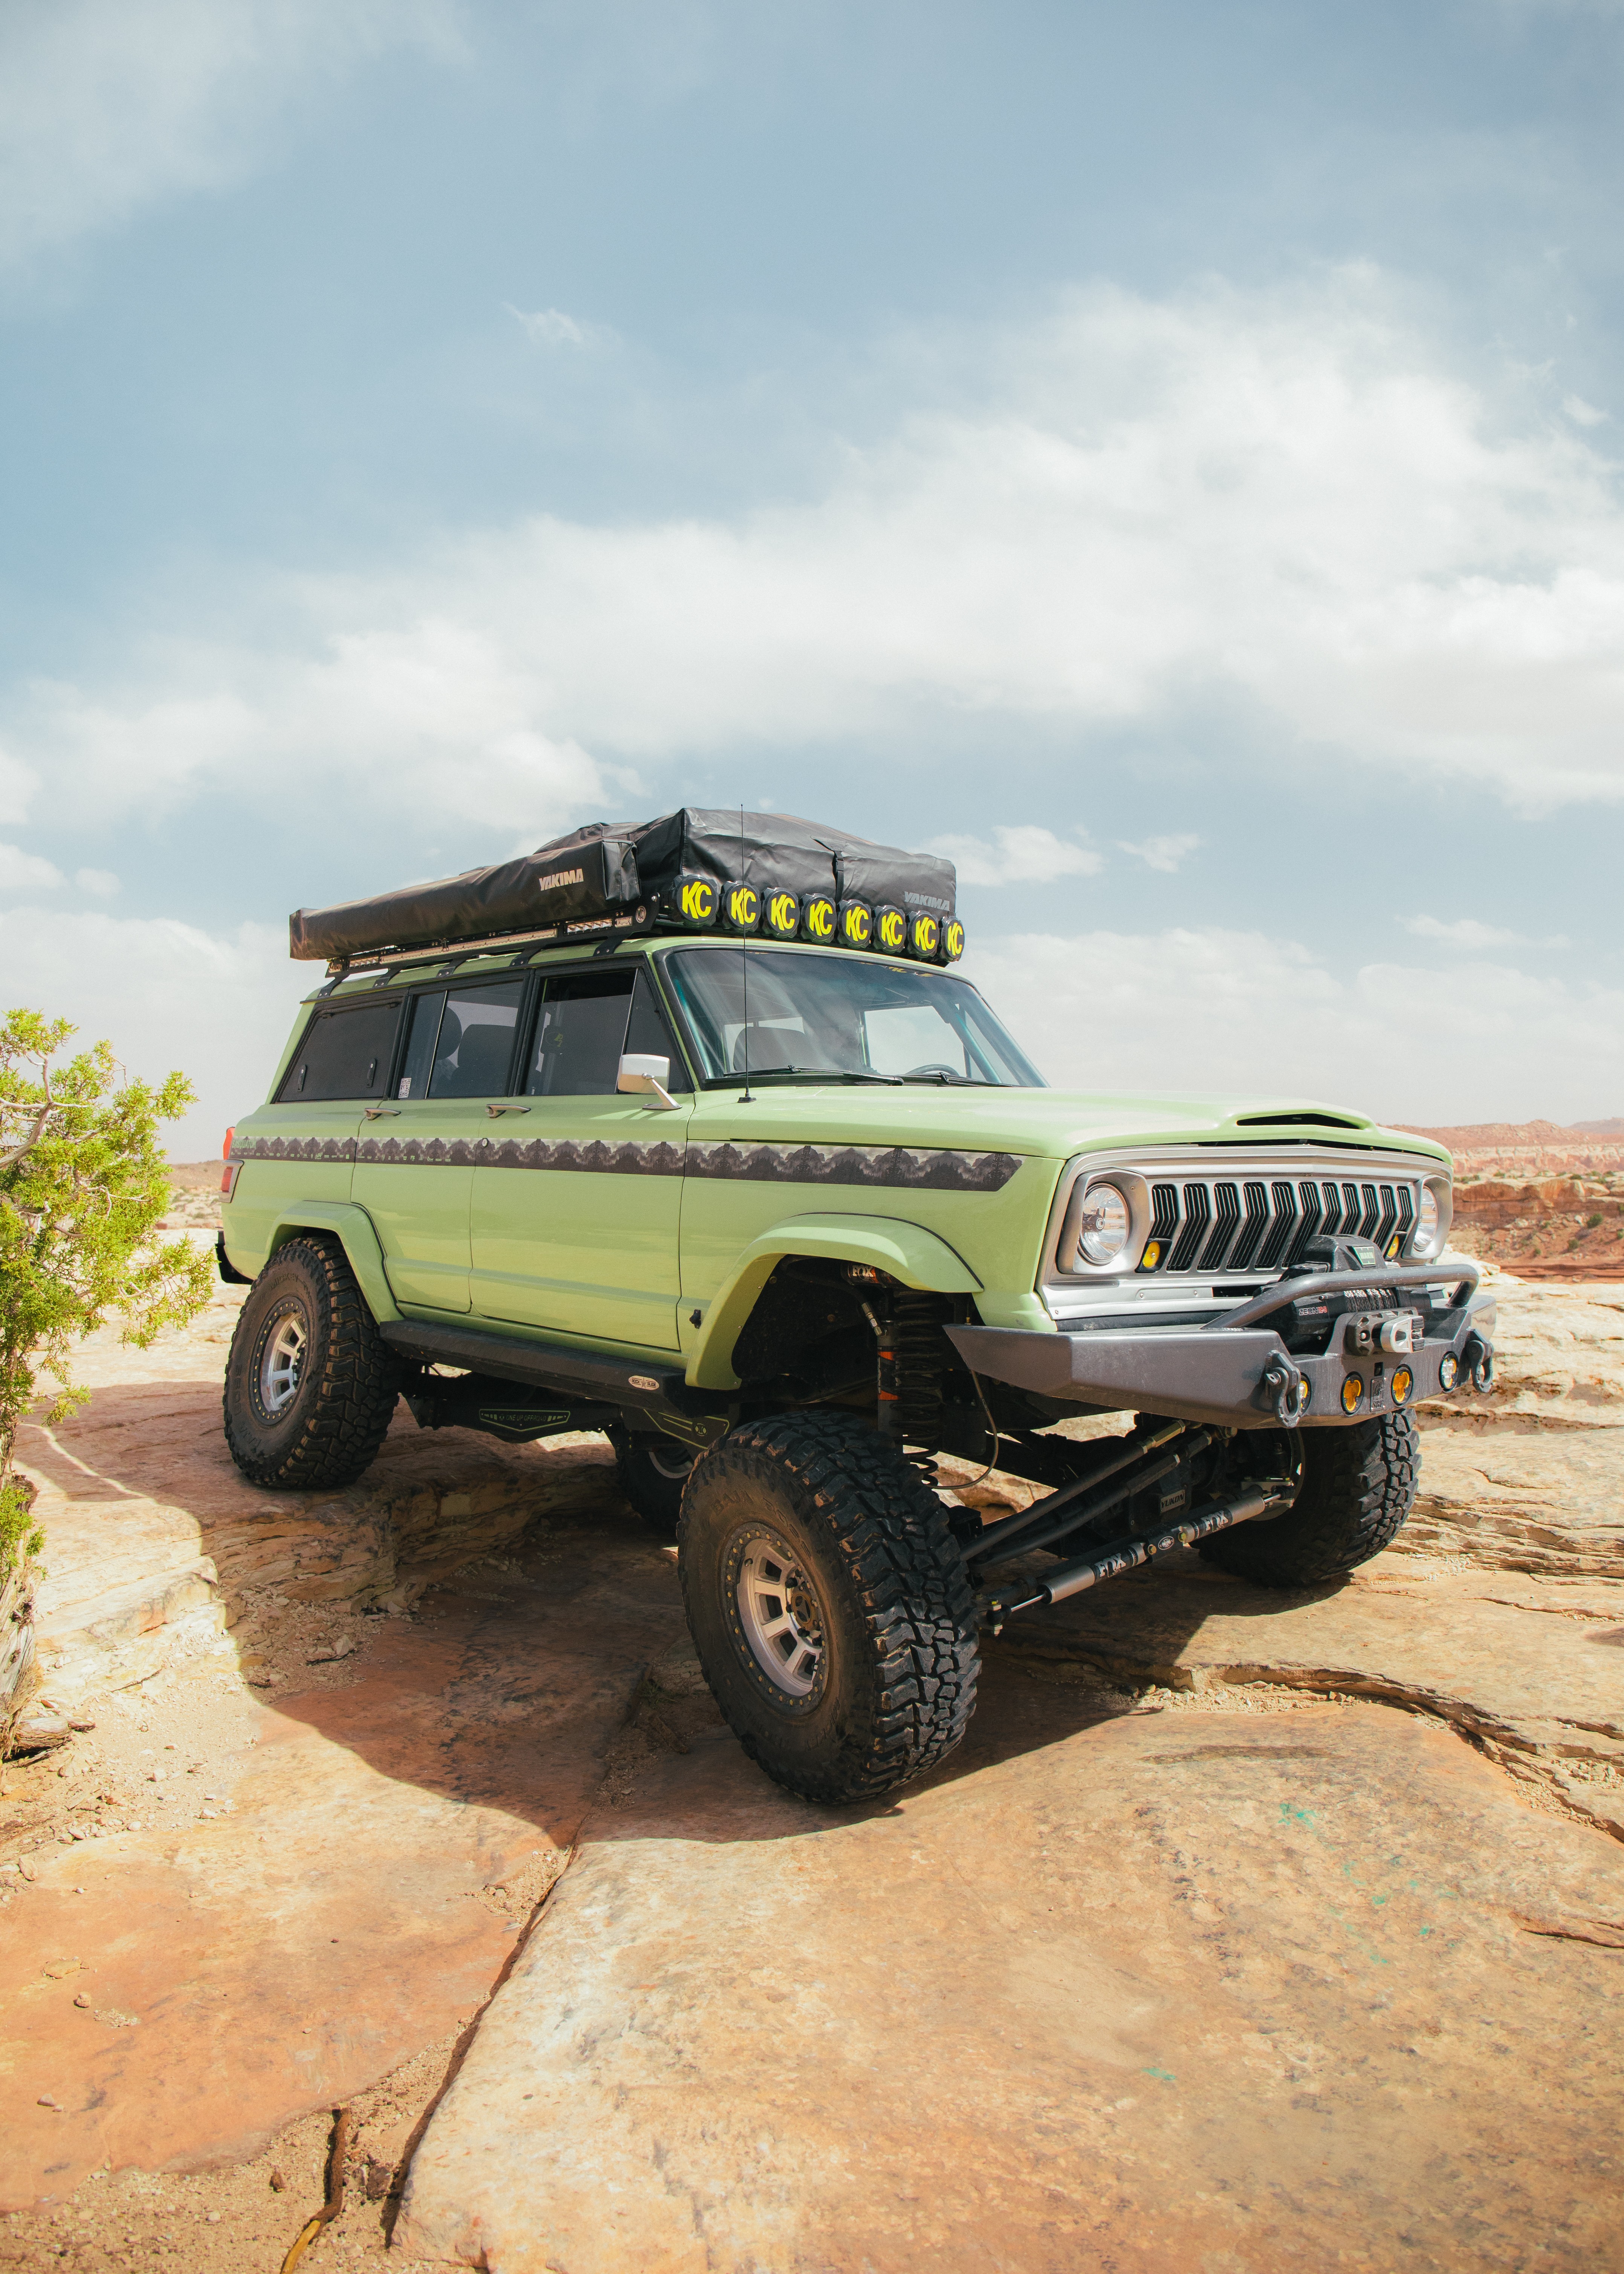 Sasquatch, A Restomodded 1979 Jeep Wagoneer, Takes On The Rugged Trails Of Moab